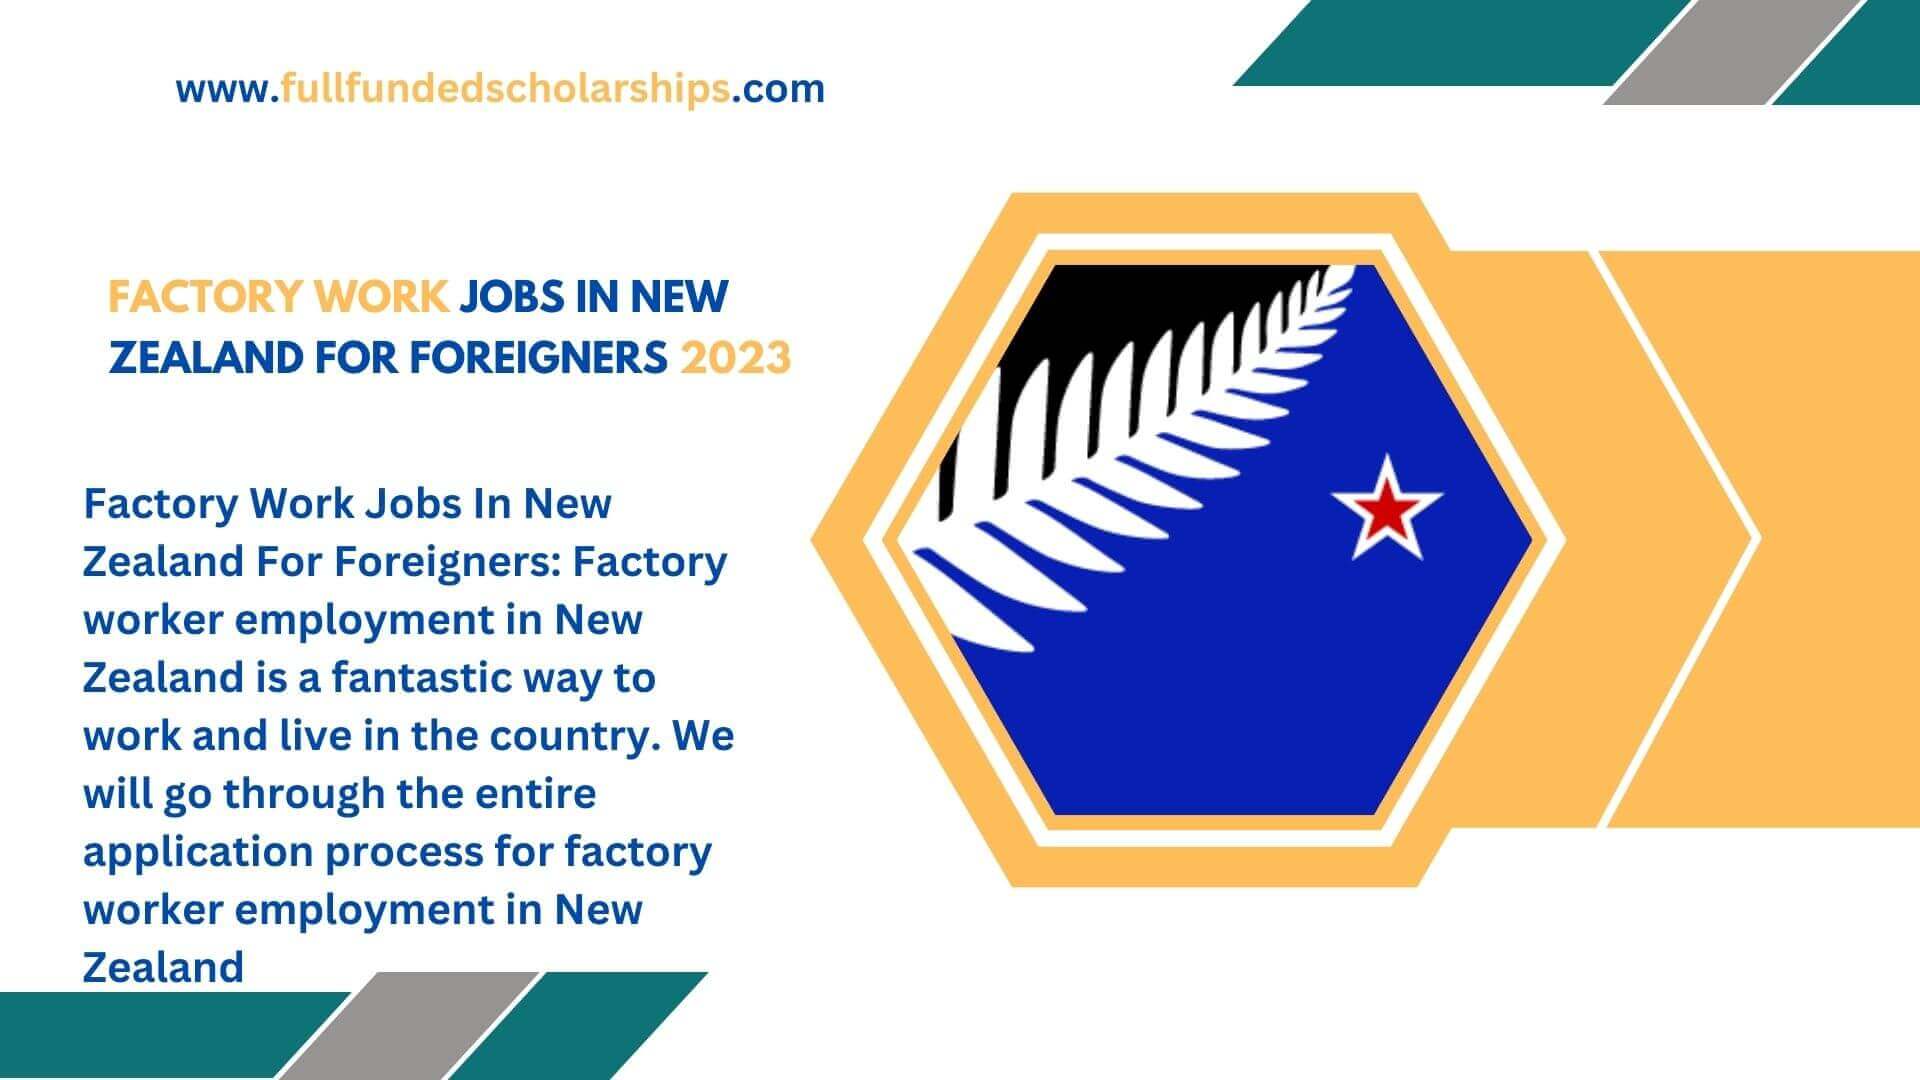 Factory Work Jobs In New Zealand For Foreigners 2023